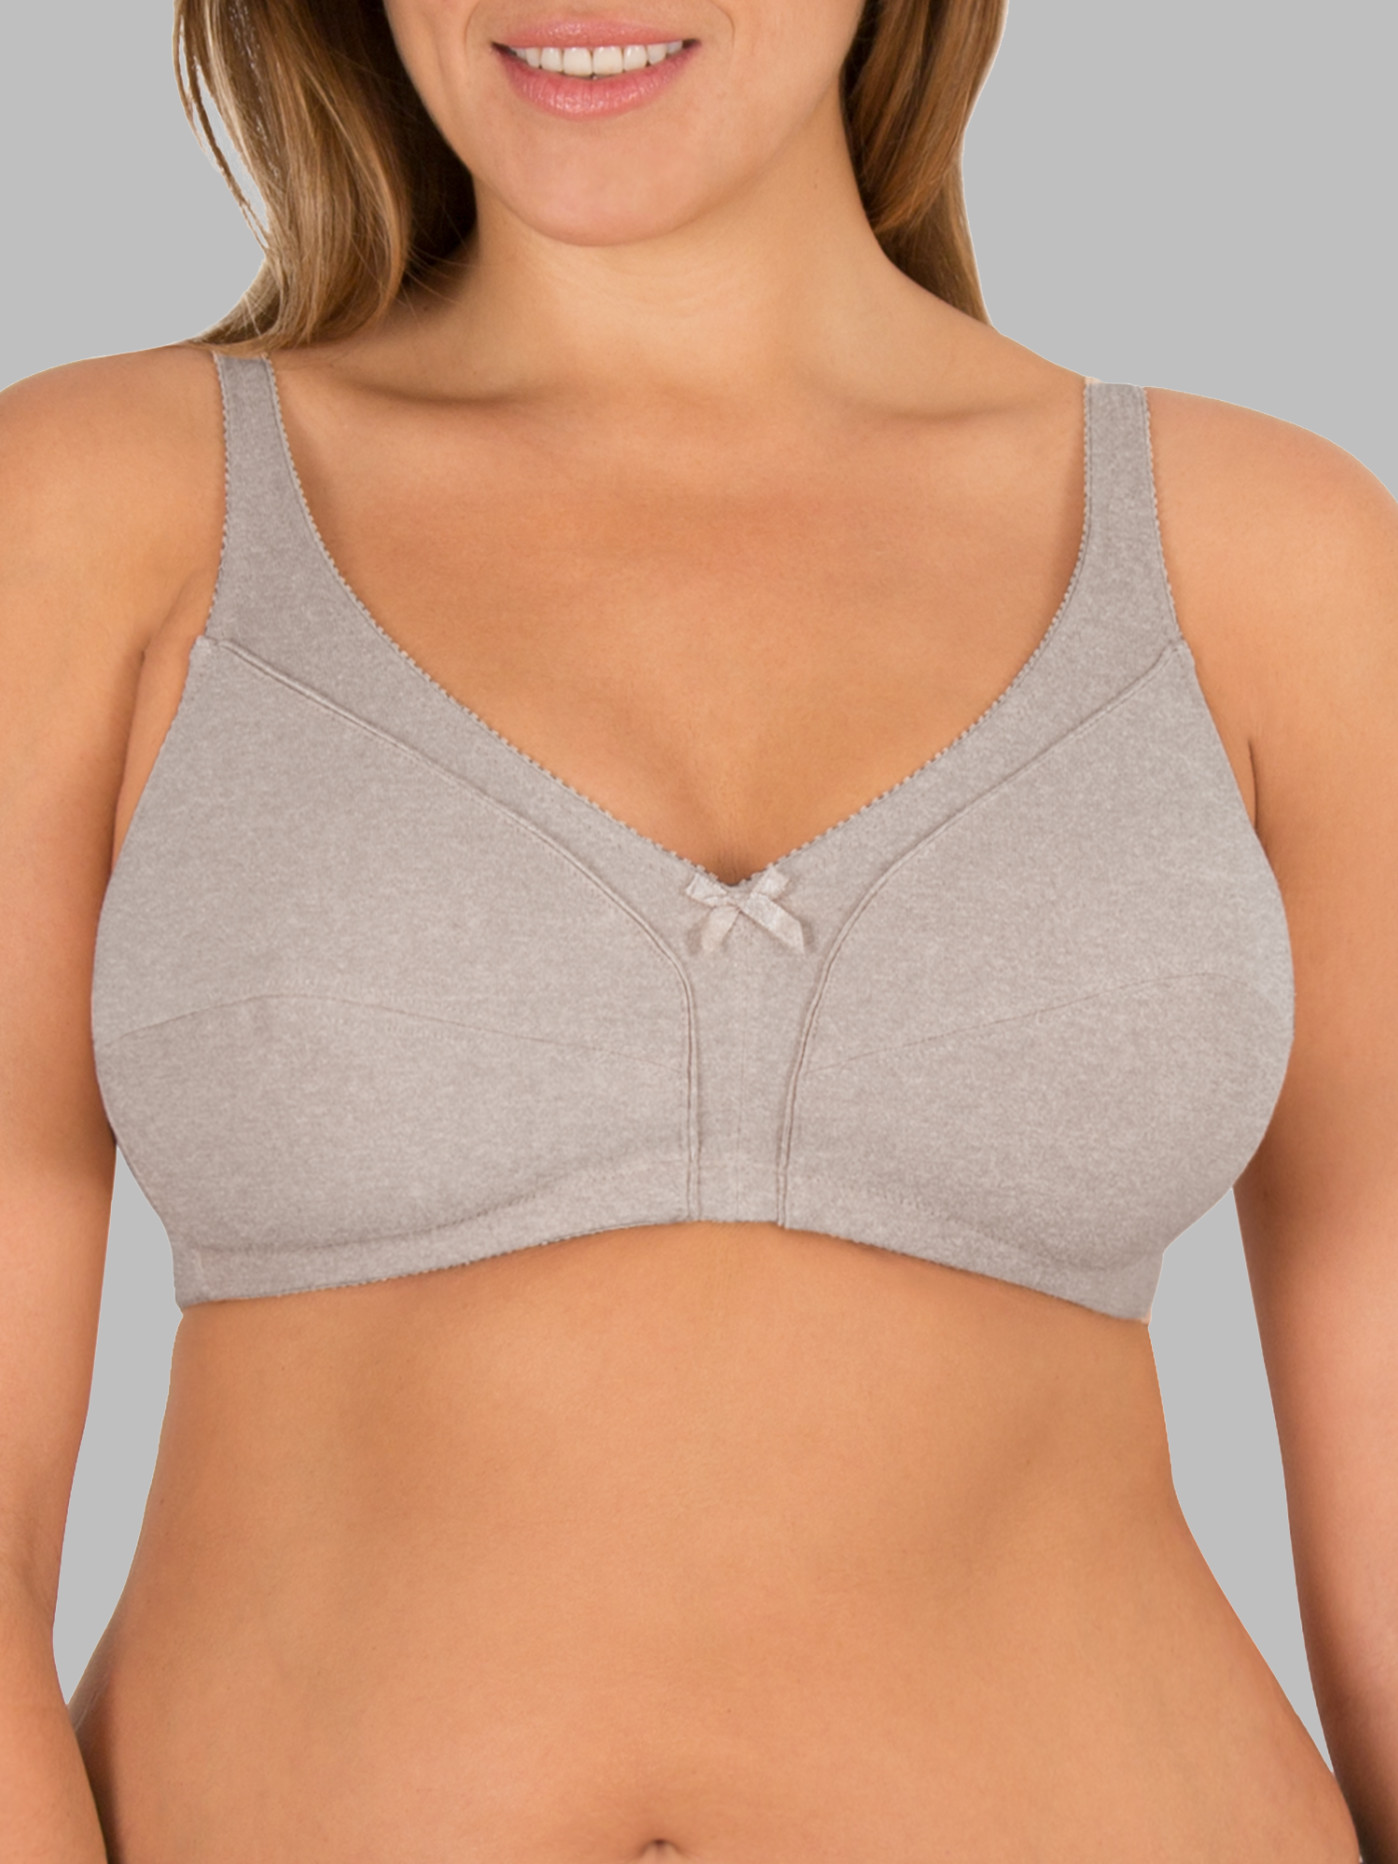 Fruit of The Loom Women's Light Lined Wirefree Heather Grey/white